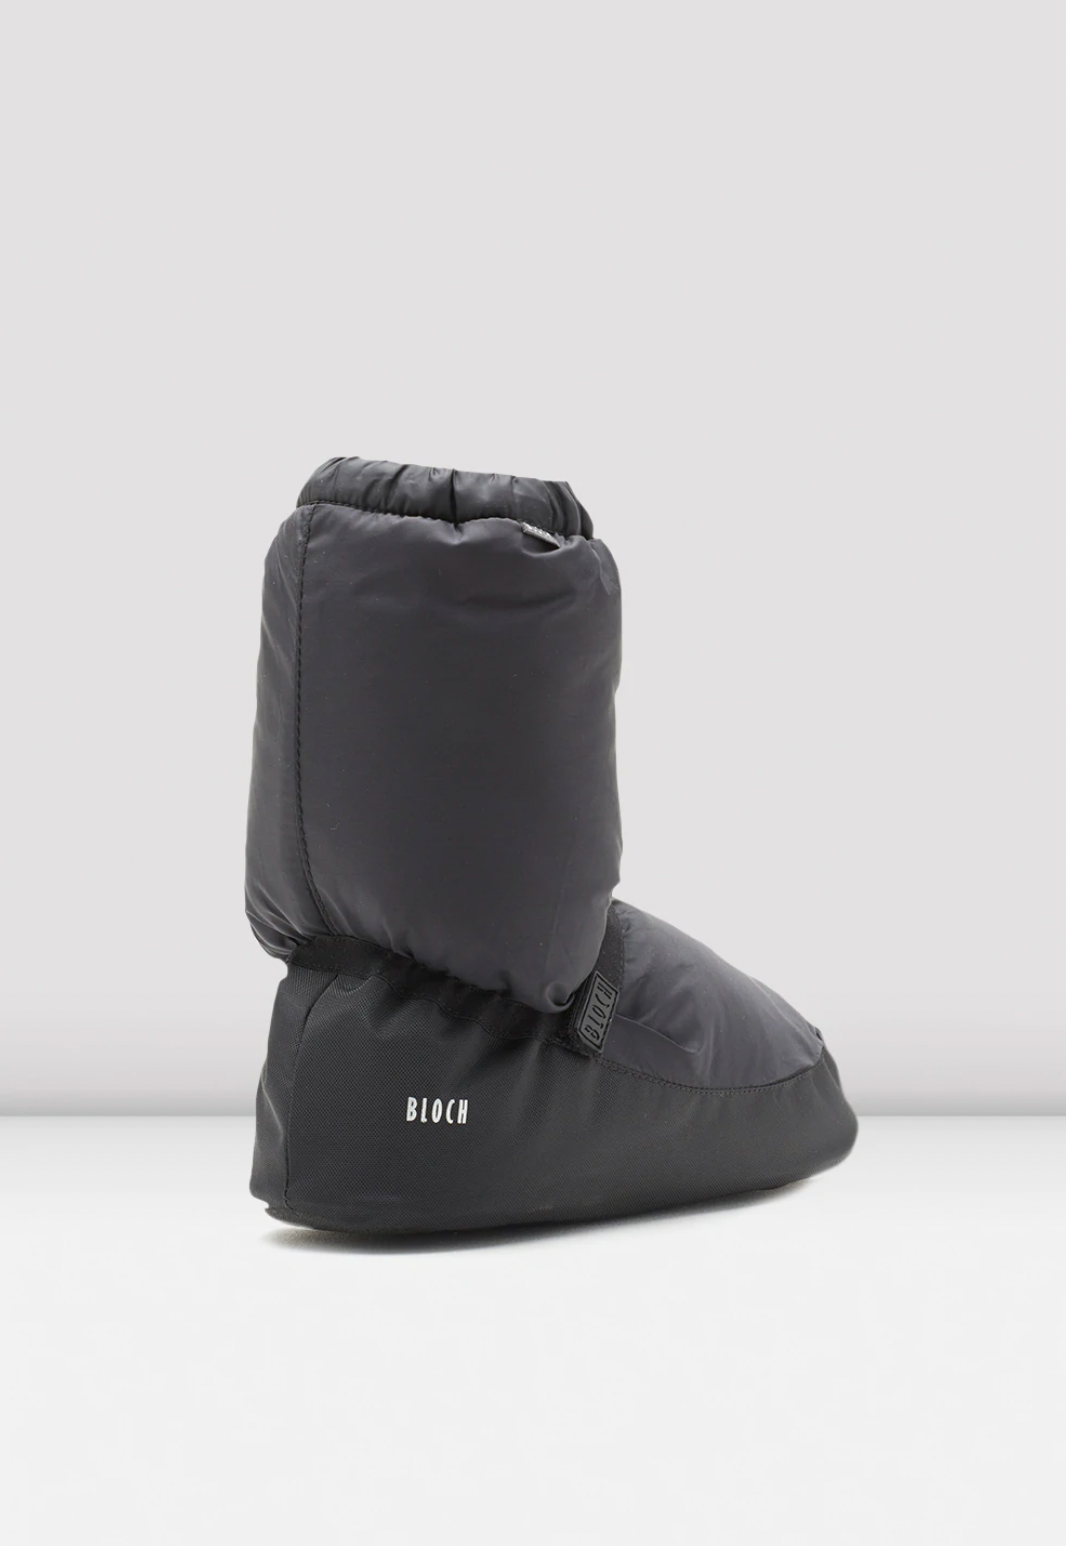 Bloch warm up dance ballet bootie in black sold by the collective dancewear